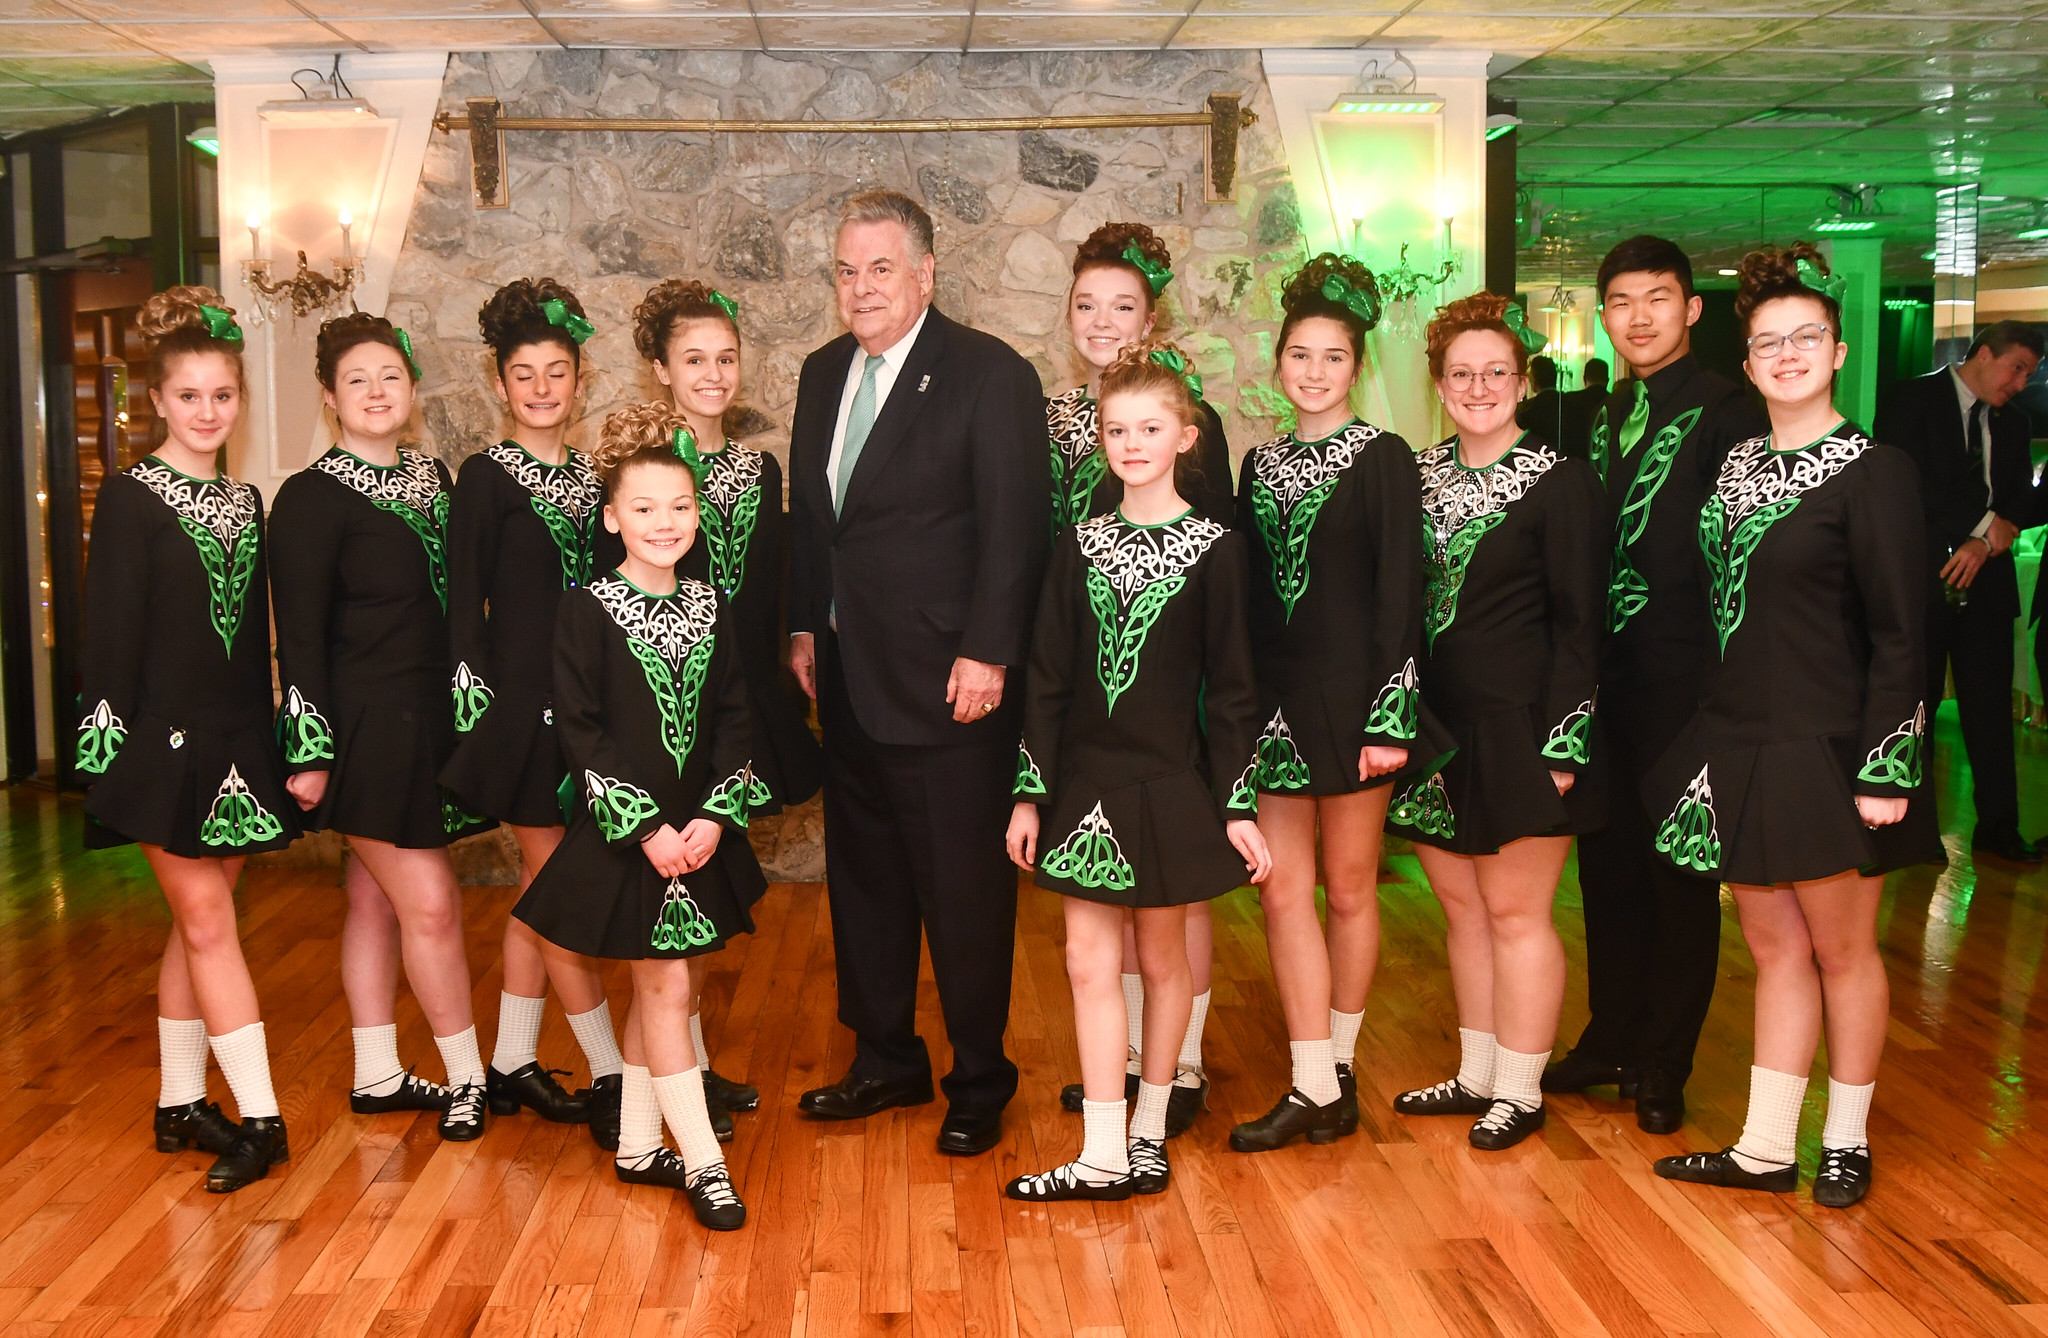 Image 2 Former U.S. Congressman Peter King with the Mise Eire Irish dancers